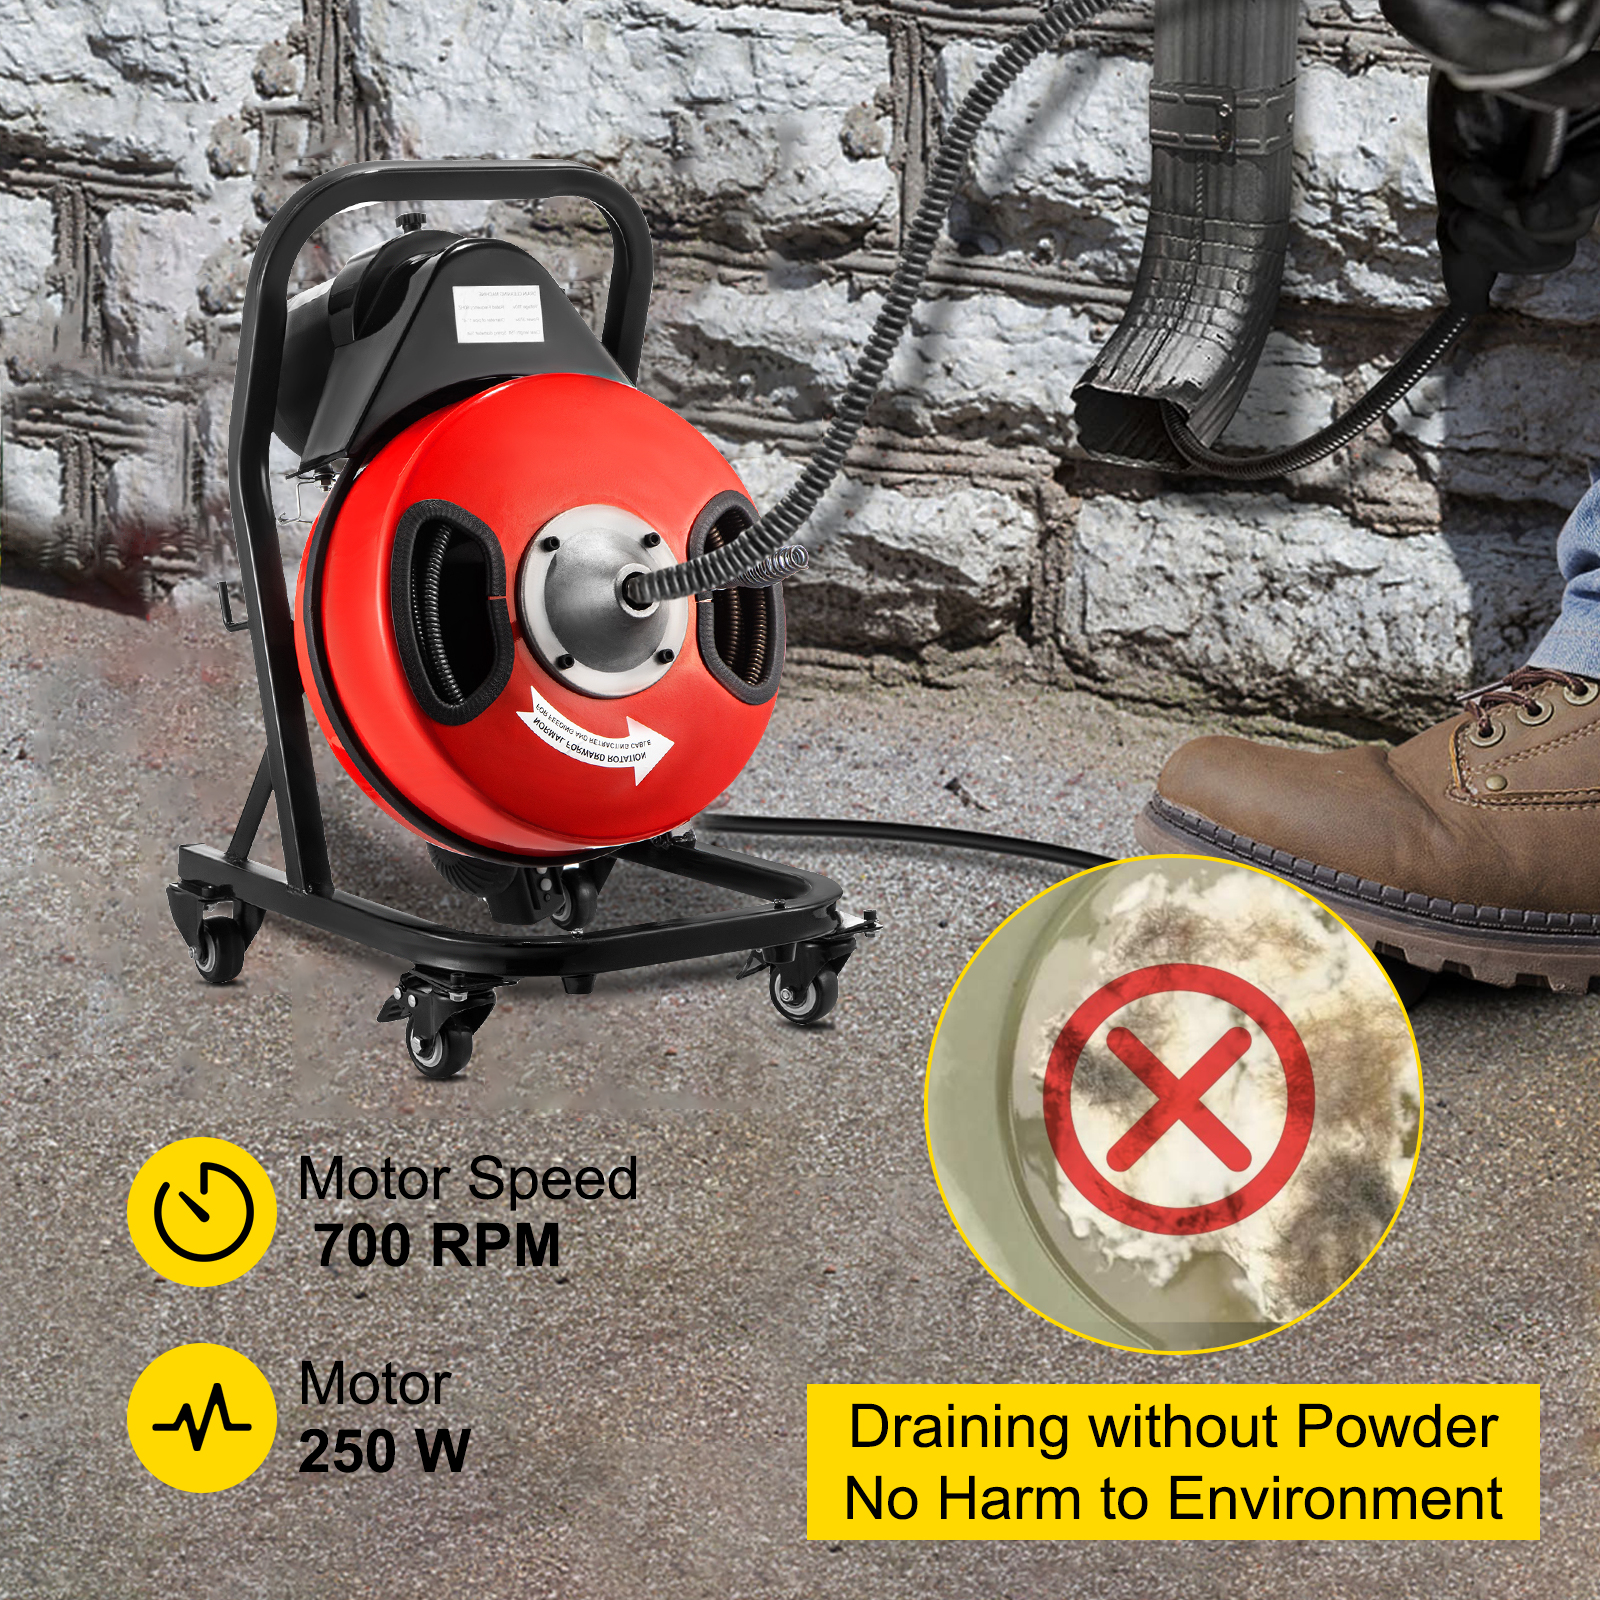 VEVOR Electric Drain Auger 50FTx1/2Inch,250W Drain Cleaner Machine,Sewer  Snake Machine,Fit 2''- 4''/51mm-102mm Pipes, w/4 Wheels, Cutters,Foot Switch,  for Drain Cleaners Plumbers VEVOR US